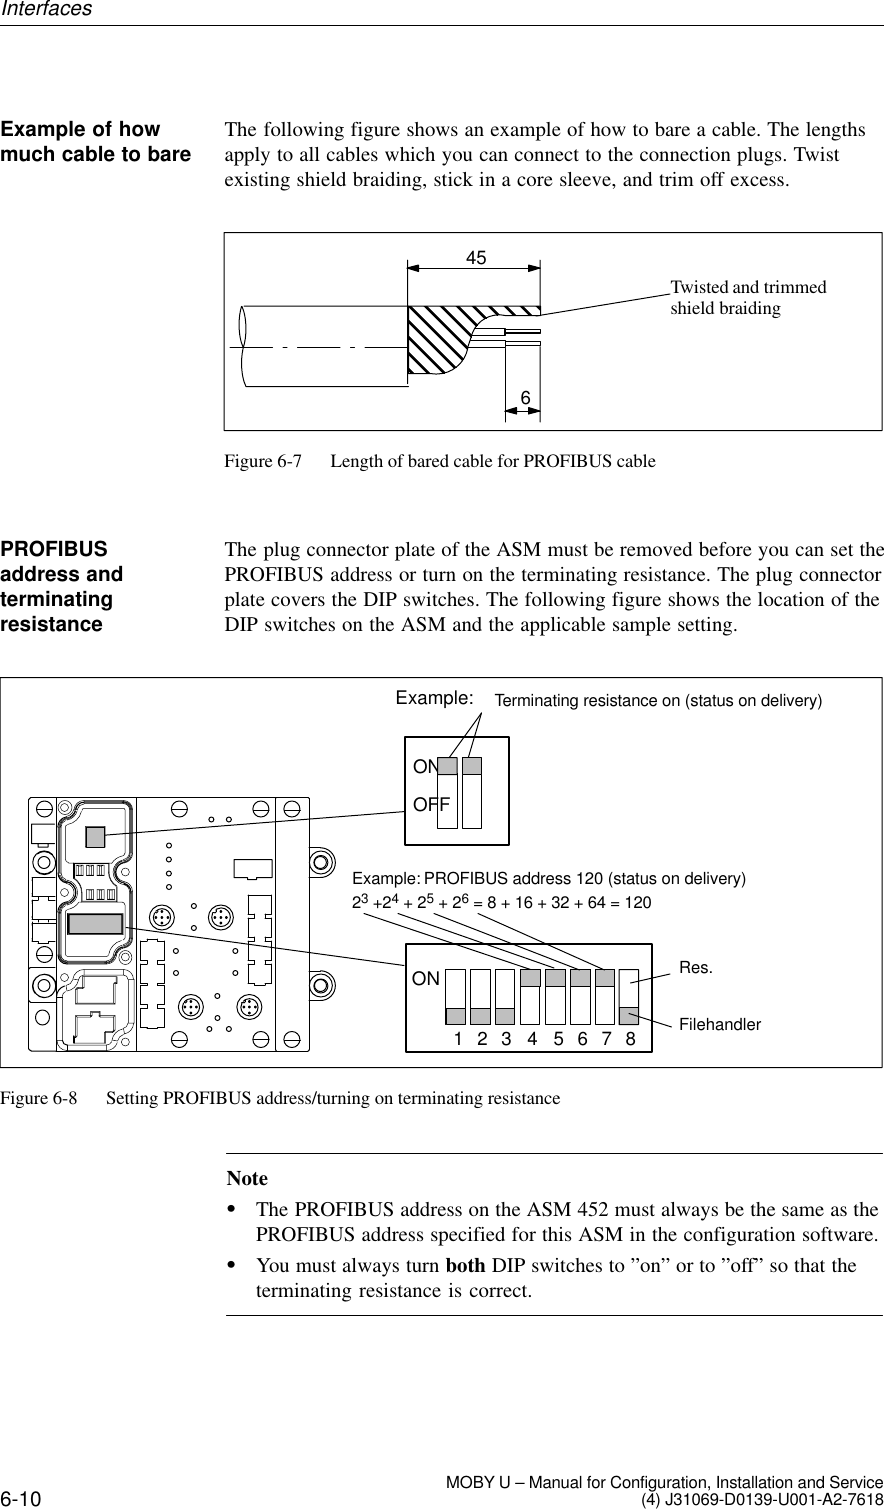 6-10 MOBY U – Manual for Configuration, Installation and Service(4) J31069-D0139-U001-A2-7618The following figure shows an example of how to bare a cable. The lengthsapply to all cables which you can connect to the connection plugs. Twistexisting shield braiding, stick in a core sleeve, and trim off excess.456Twisted and trimmed shield braidingFigure 6-7 Length of bared cable for PROFIBUS cableThe plug connector plate of the ASM must be removed before you can set thePROFIBUS address or turn on the terminating resistance. The plug connectorplate covers the DIP switches. The following figure shows the location of theDIP switches on the ASM and the applicable sample setting.Example: PROFIBUS address 120 (status on delivery)7654321ON23 +24 + 25 + 26 = 8 + 16 + 32 + 64 = 1208Example: Terminating resistance on (status on delivery)OFFONRes.FilehandlerFigure 6-8 Setting PROFIBUS address/turning on terminating resistanceNoteThe PROFIBUS address on the ASM 452 must always be the same as thePROFIBUS address specified for this ASM in the configuration software.You must always turn both DIP switches to ”on” or to ”off” so that theterminating resistance is correct.Example of howmuch cable to barePROFIBUSaddress andterminatingresistanceInterfaces